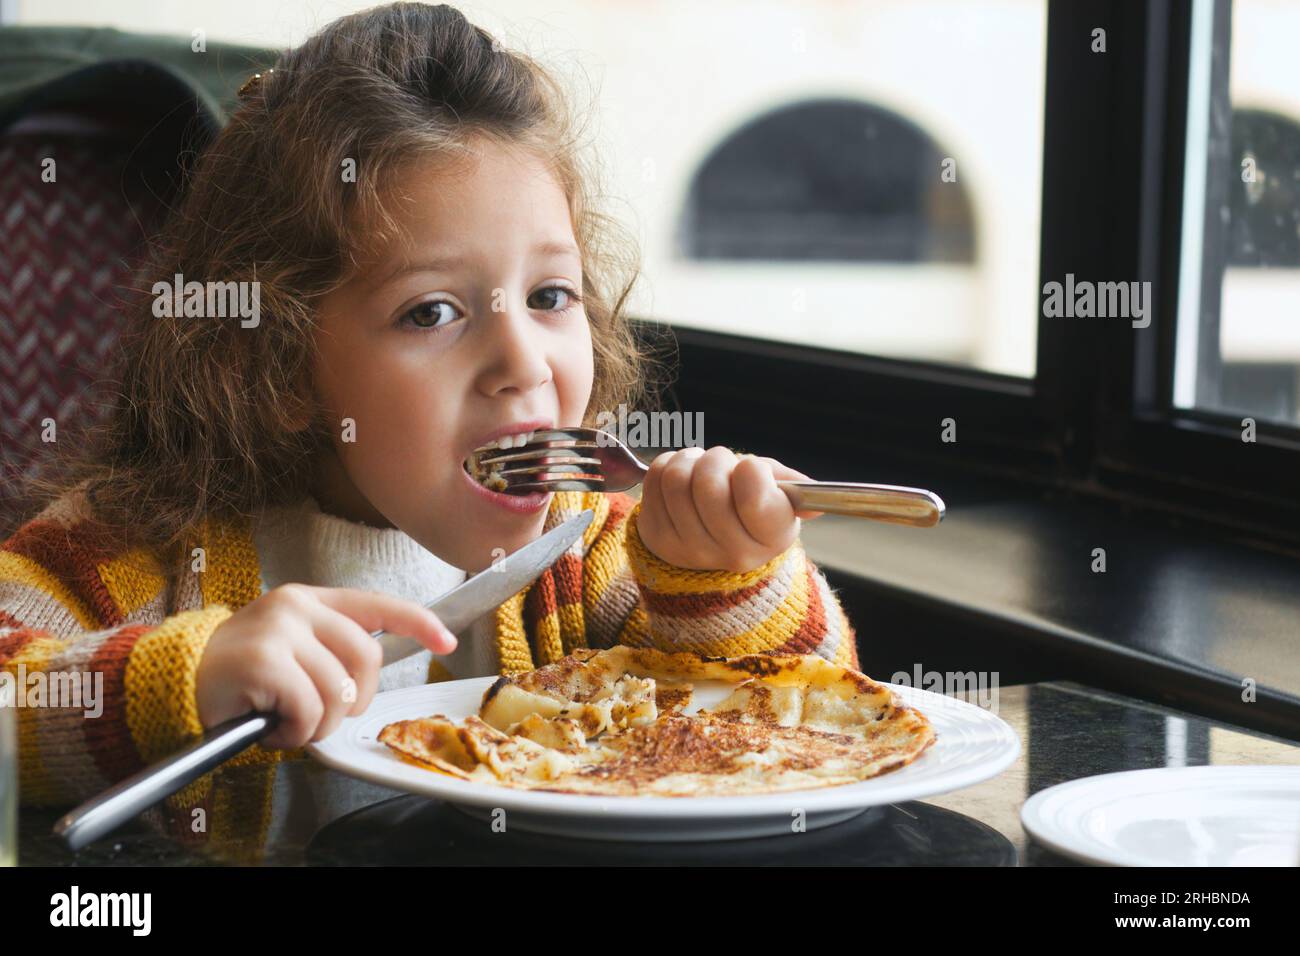 A young white Caucasian girl eating a breakfast pancake with a knife and fork Stock Photo